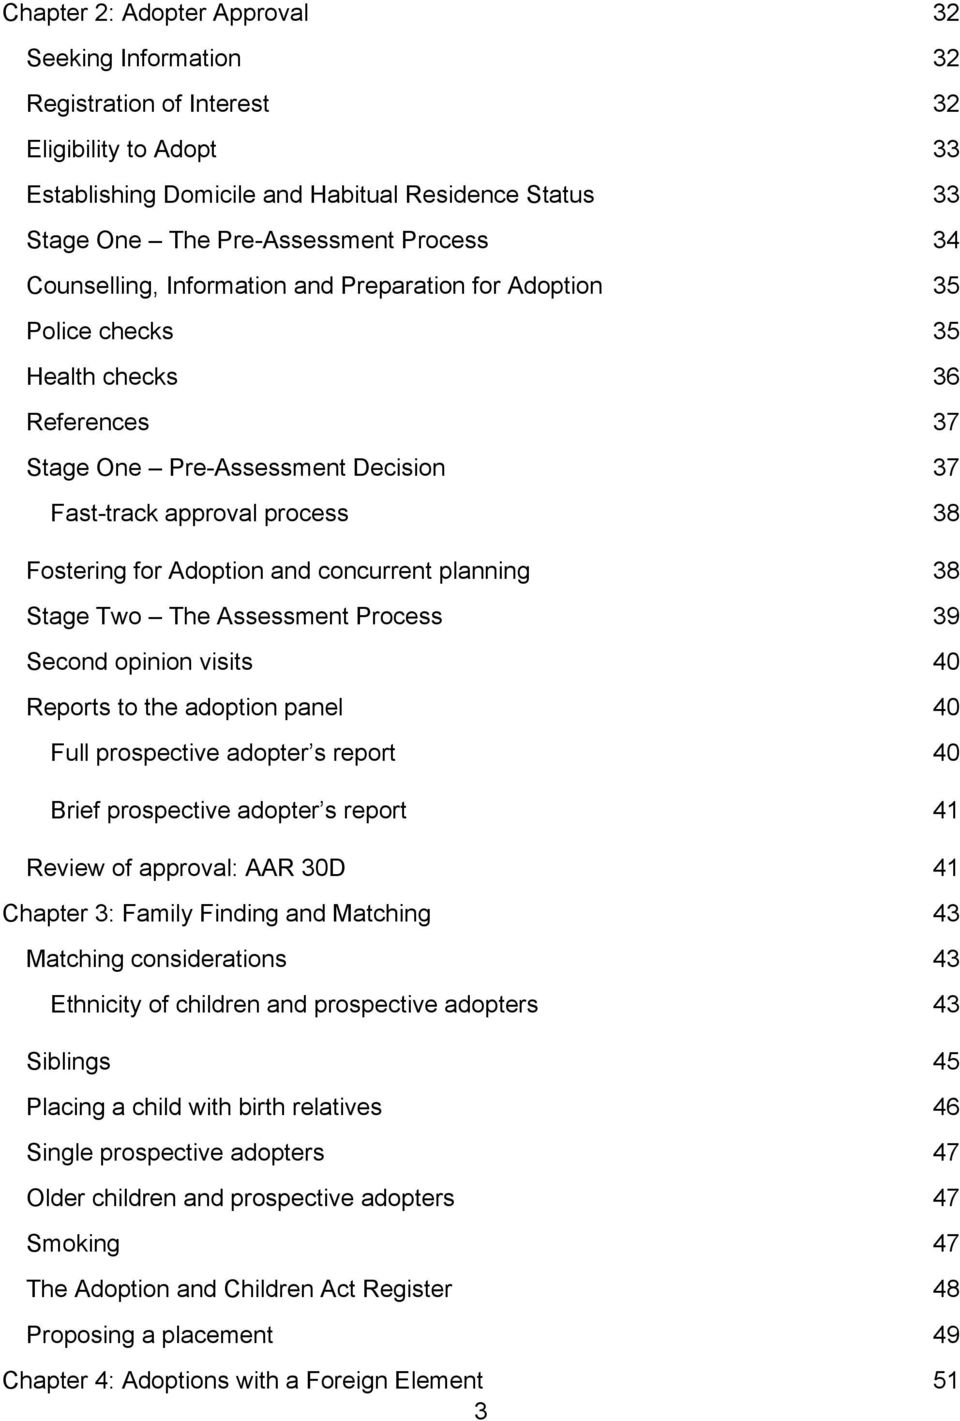 and concurrent planning 38 Stage Two The Assessment Process 39 Second opinion visits 40 Reports to the adoption panel 40 Full prospective adopter s report 40 Brief prospective adopter s report 41